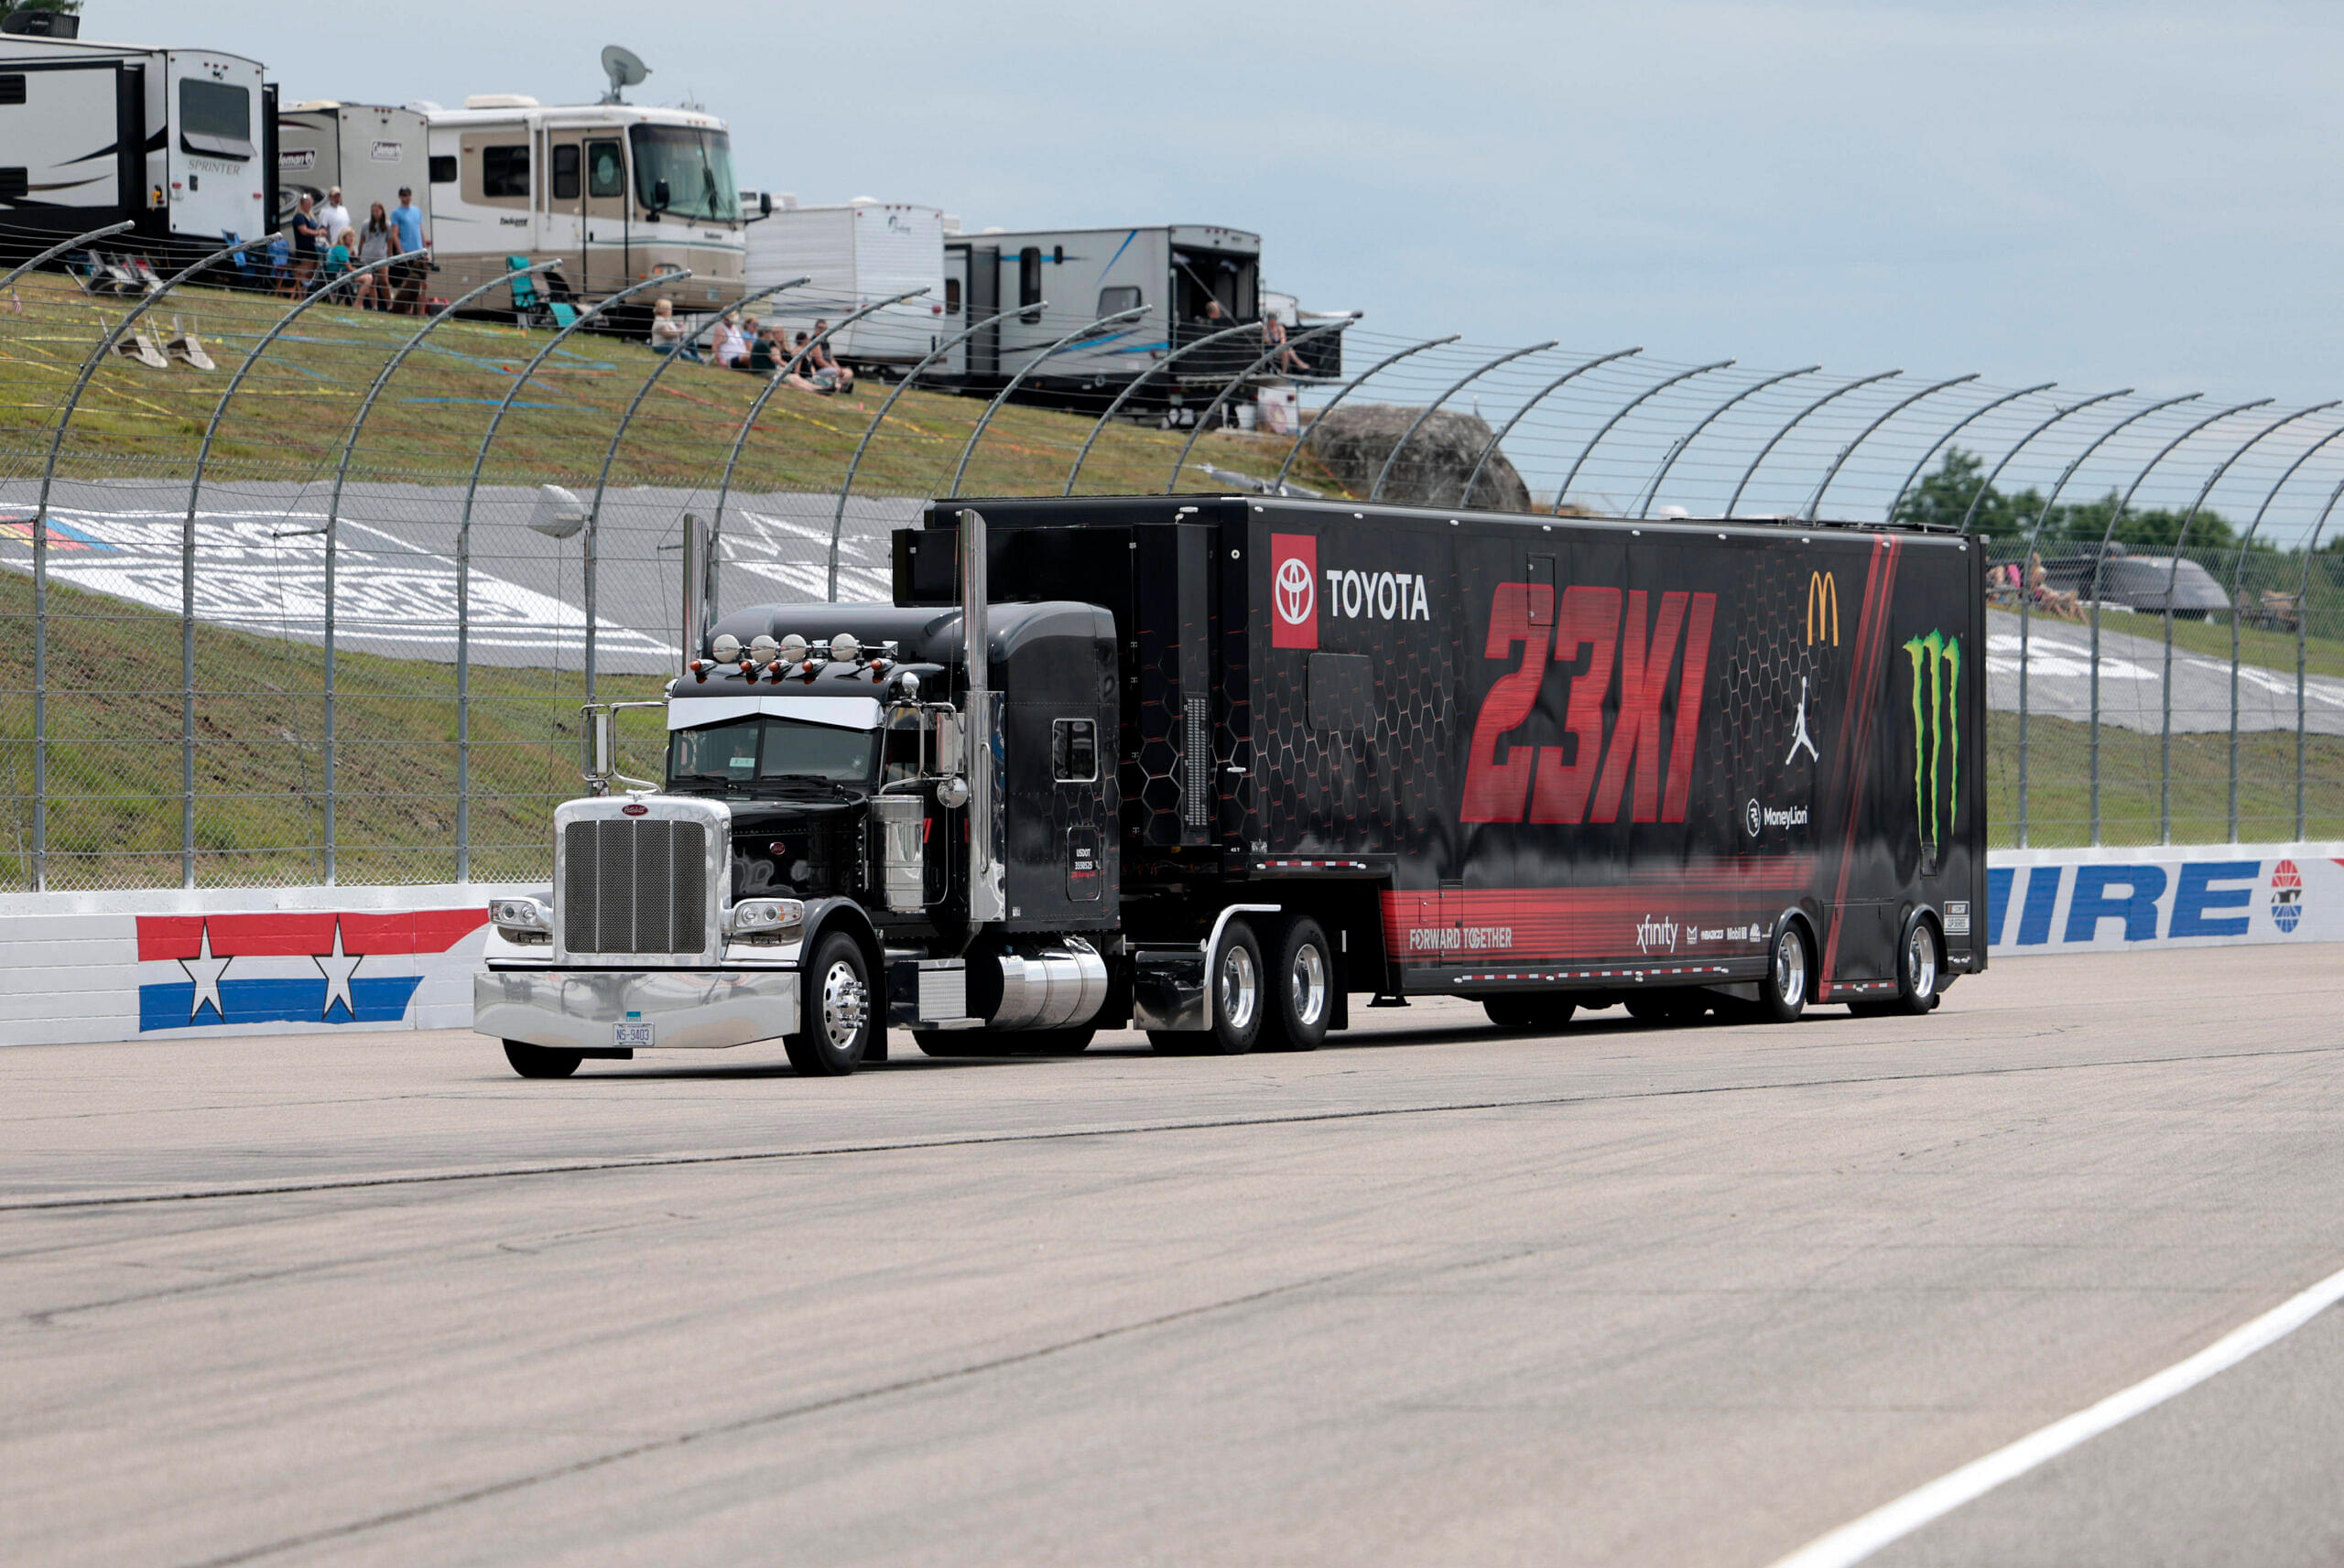 NASCAR Haulers: Cost, Weight, Other details about NASCAR essential